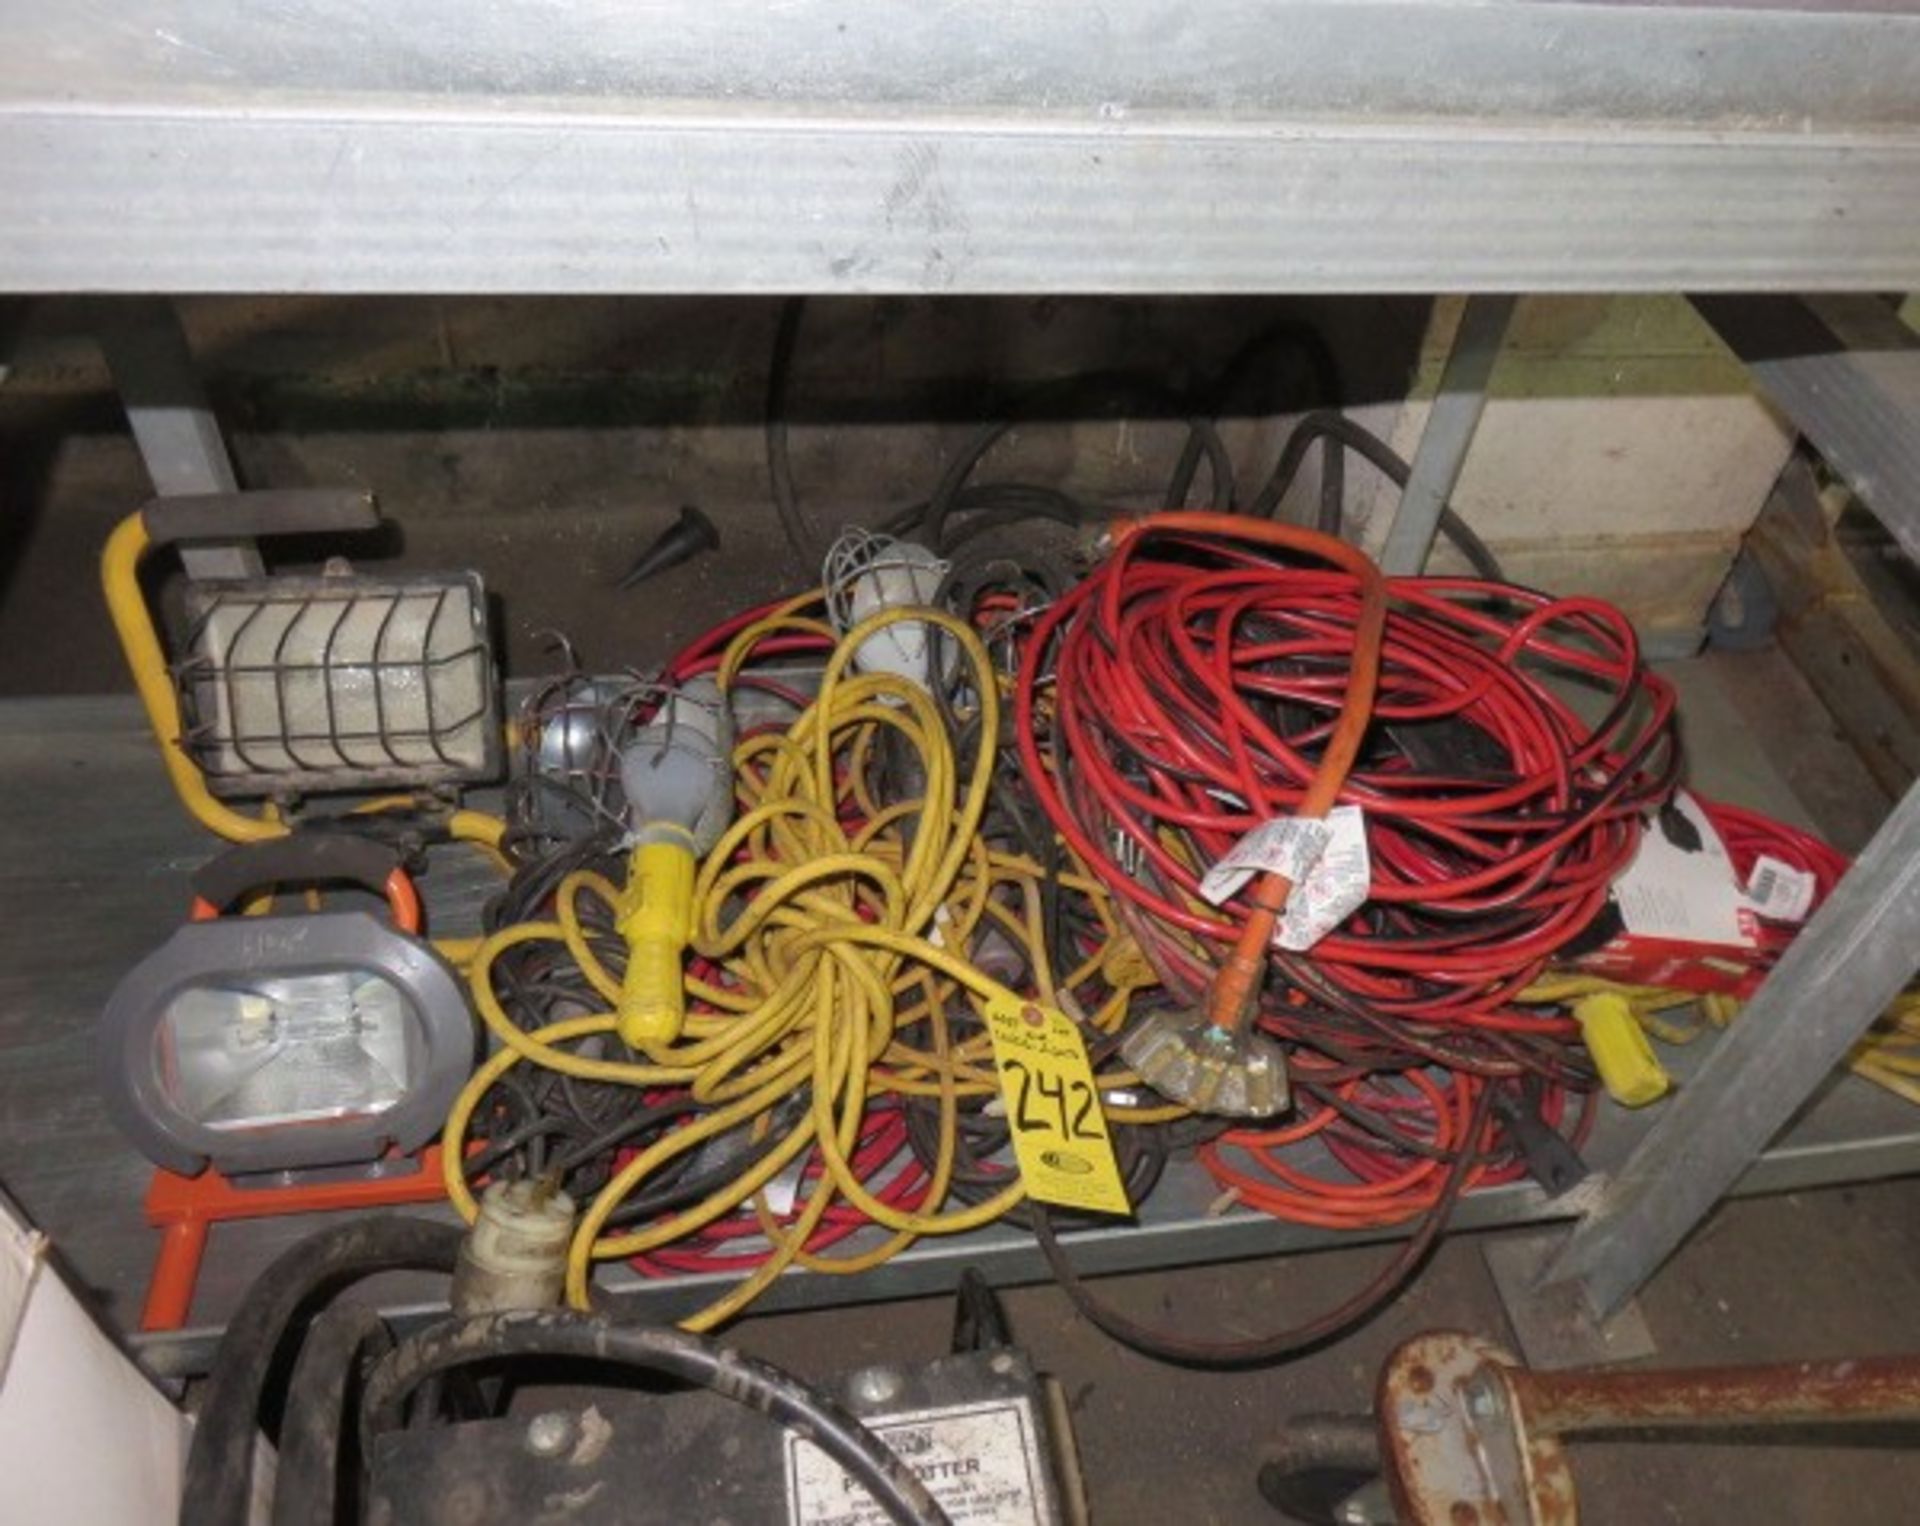 ASSORTED ELECTRICAL EXTENSION CORDS AND SAFETY LIGHTS